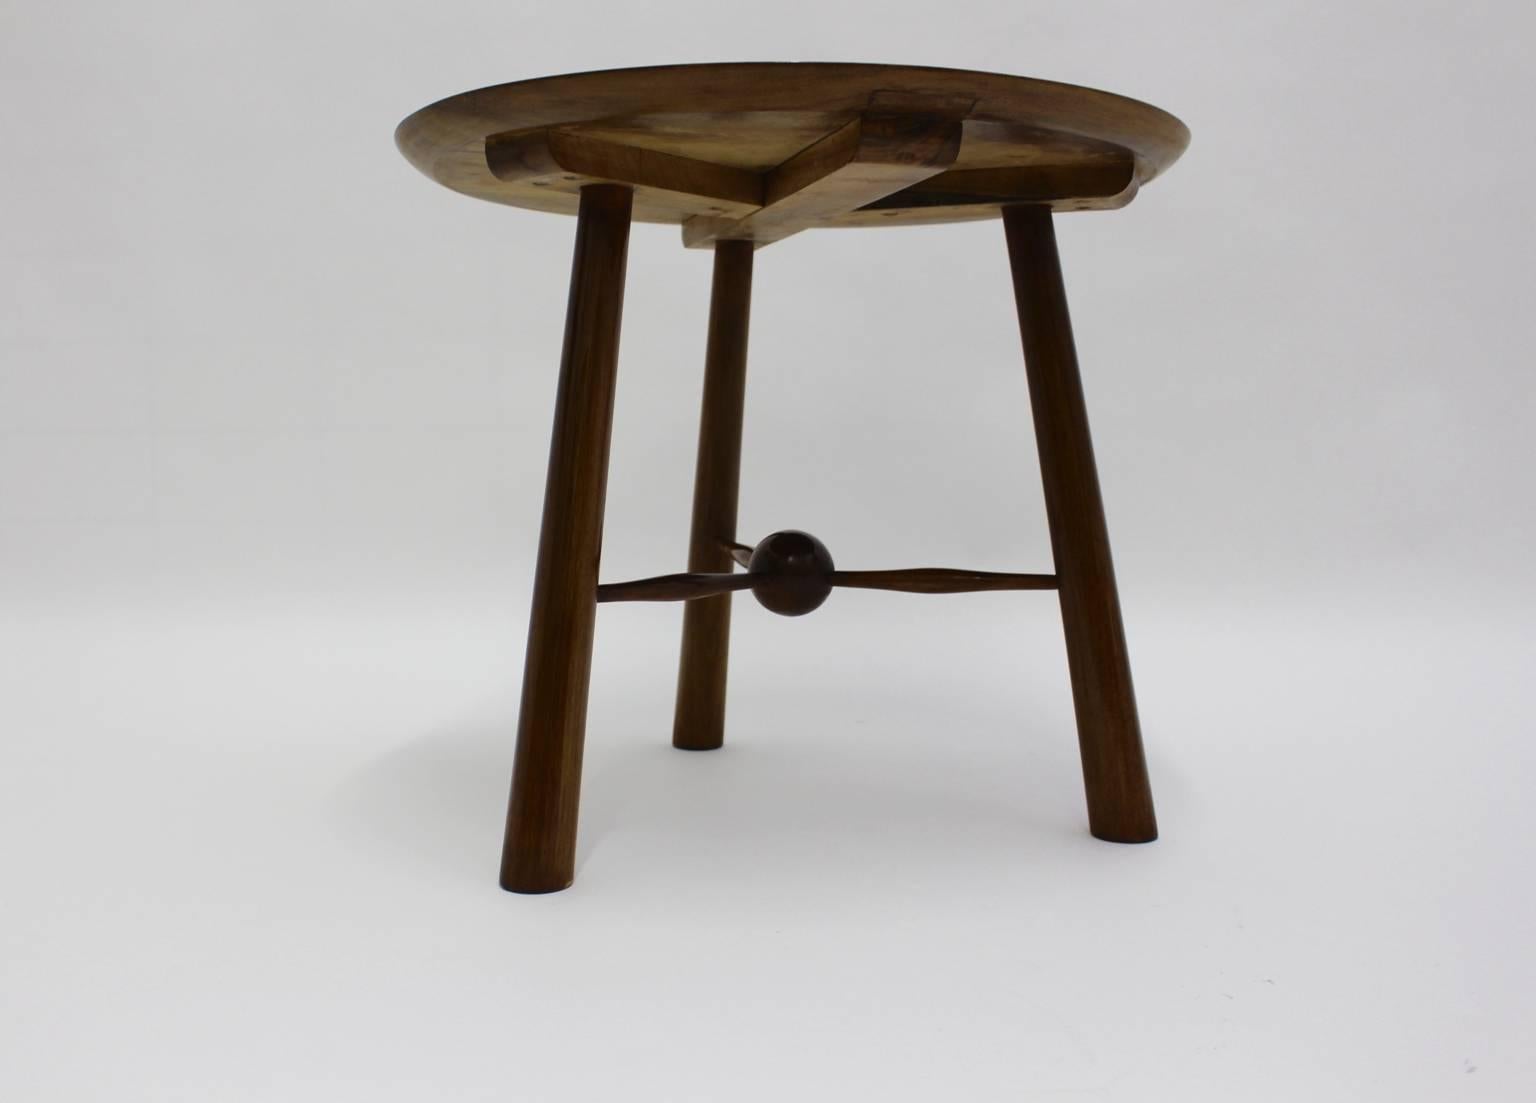 Art deco vintage tripod coffee table, which was designed by Walter Sobotka, Vienna 1930s.
A stunning and refreshed coffee table or side table from solid walnut in very good and ready to live condition.
This presented coffee table shows a round top